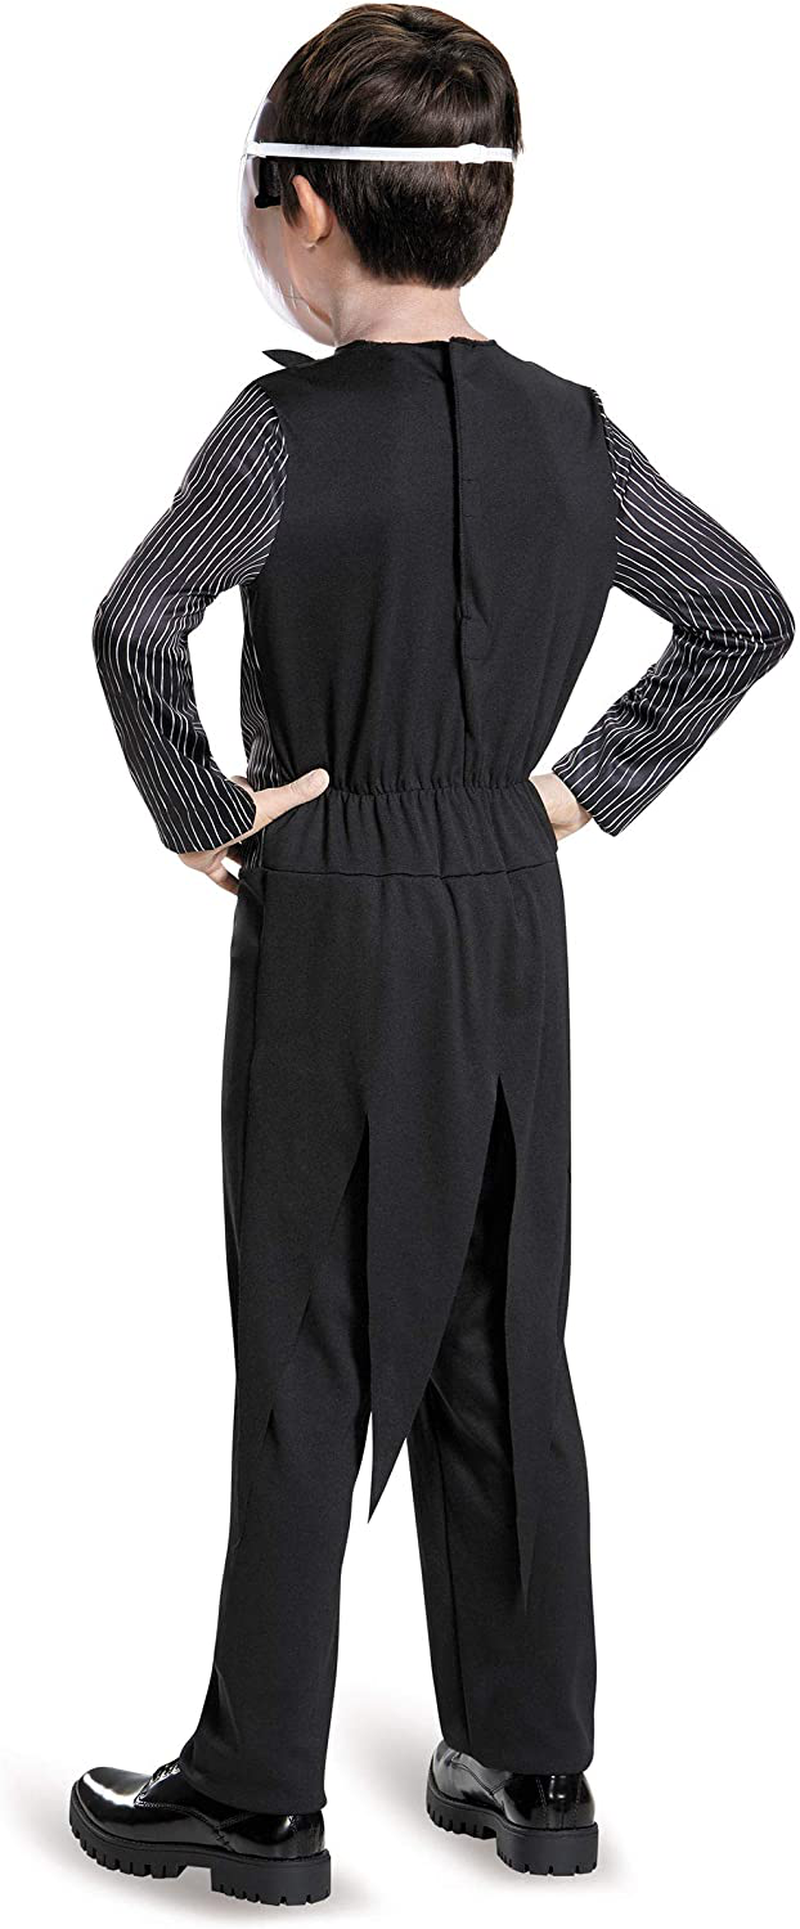 Disguise Child Jack Skellington Costume Small Apparel & Accessories > Costumes & Accessories > Costumes Disguise   